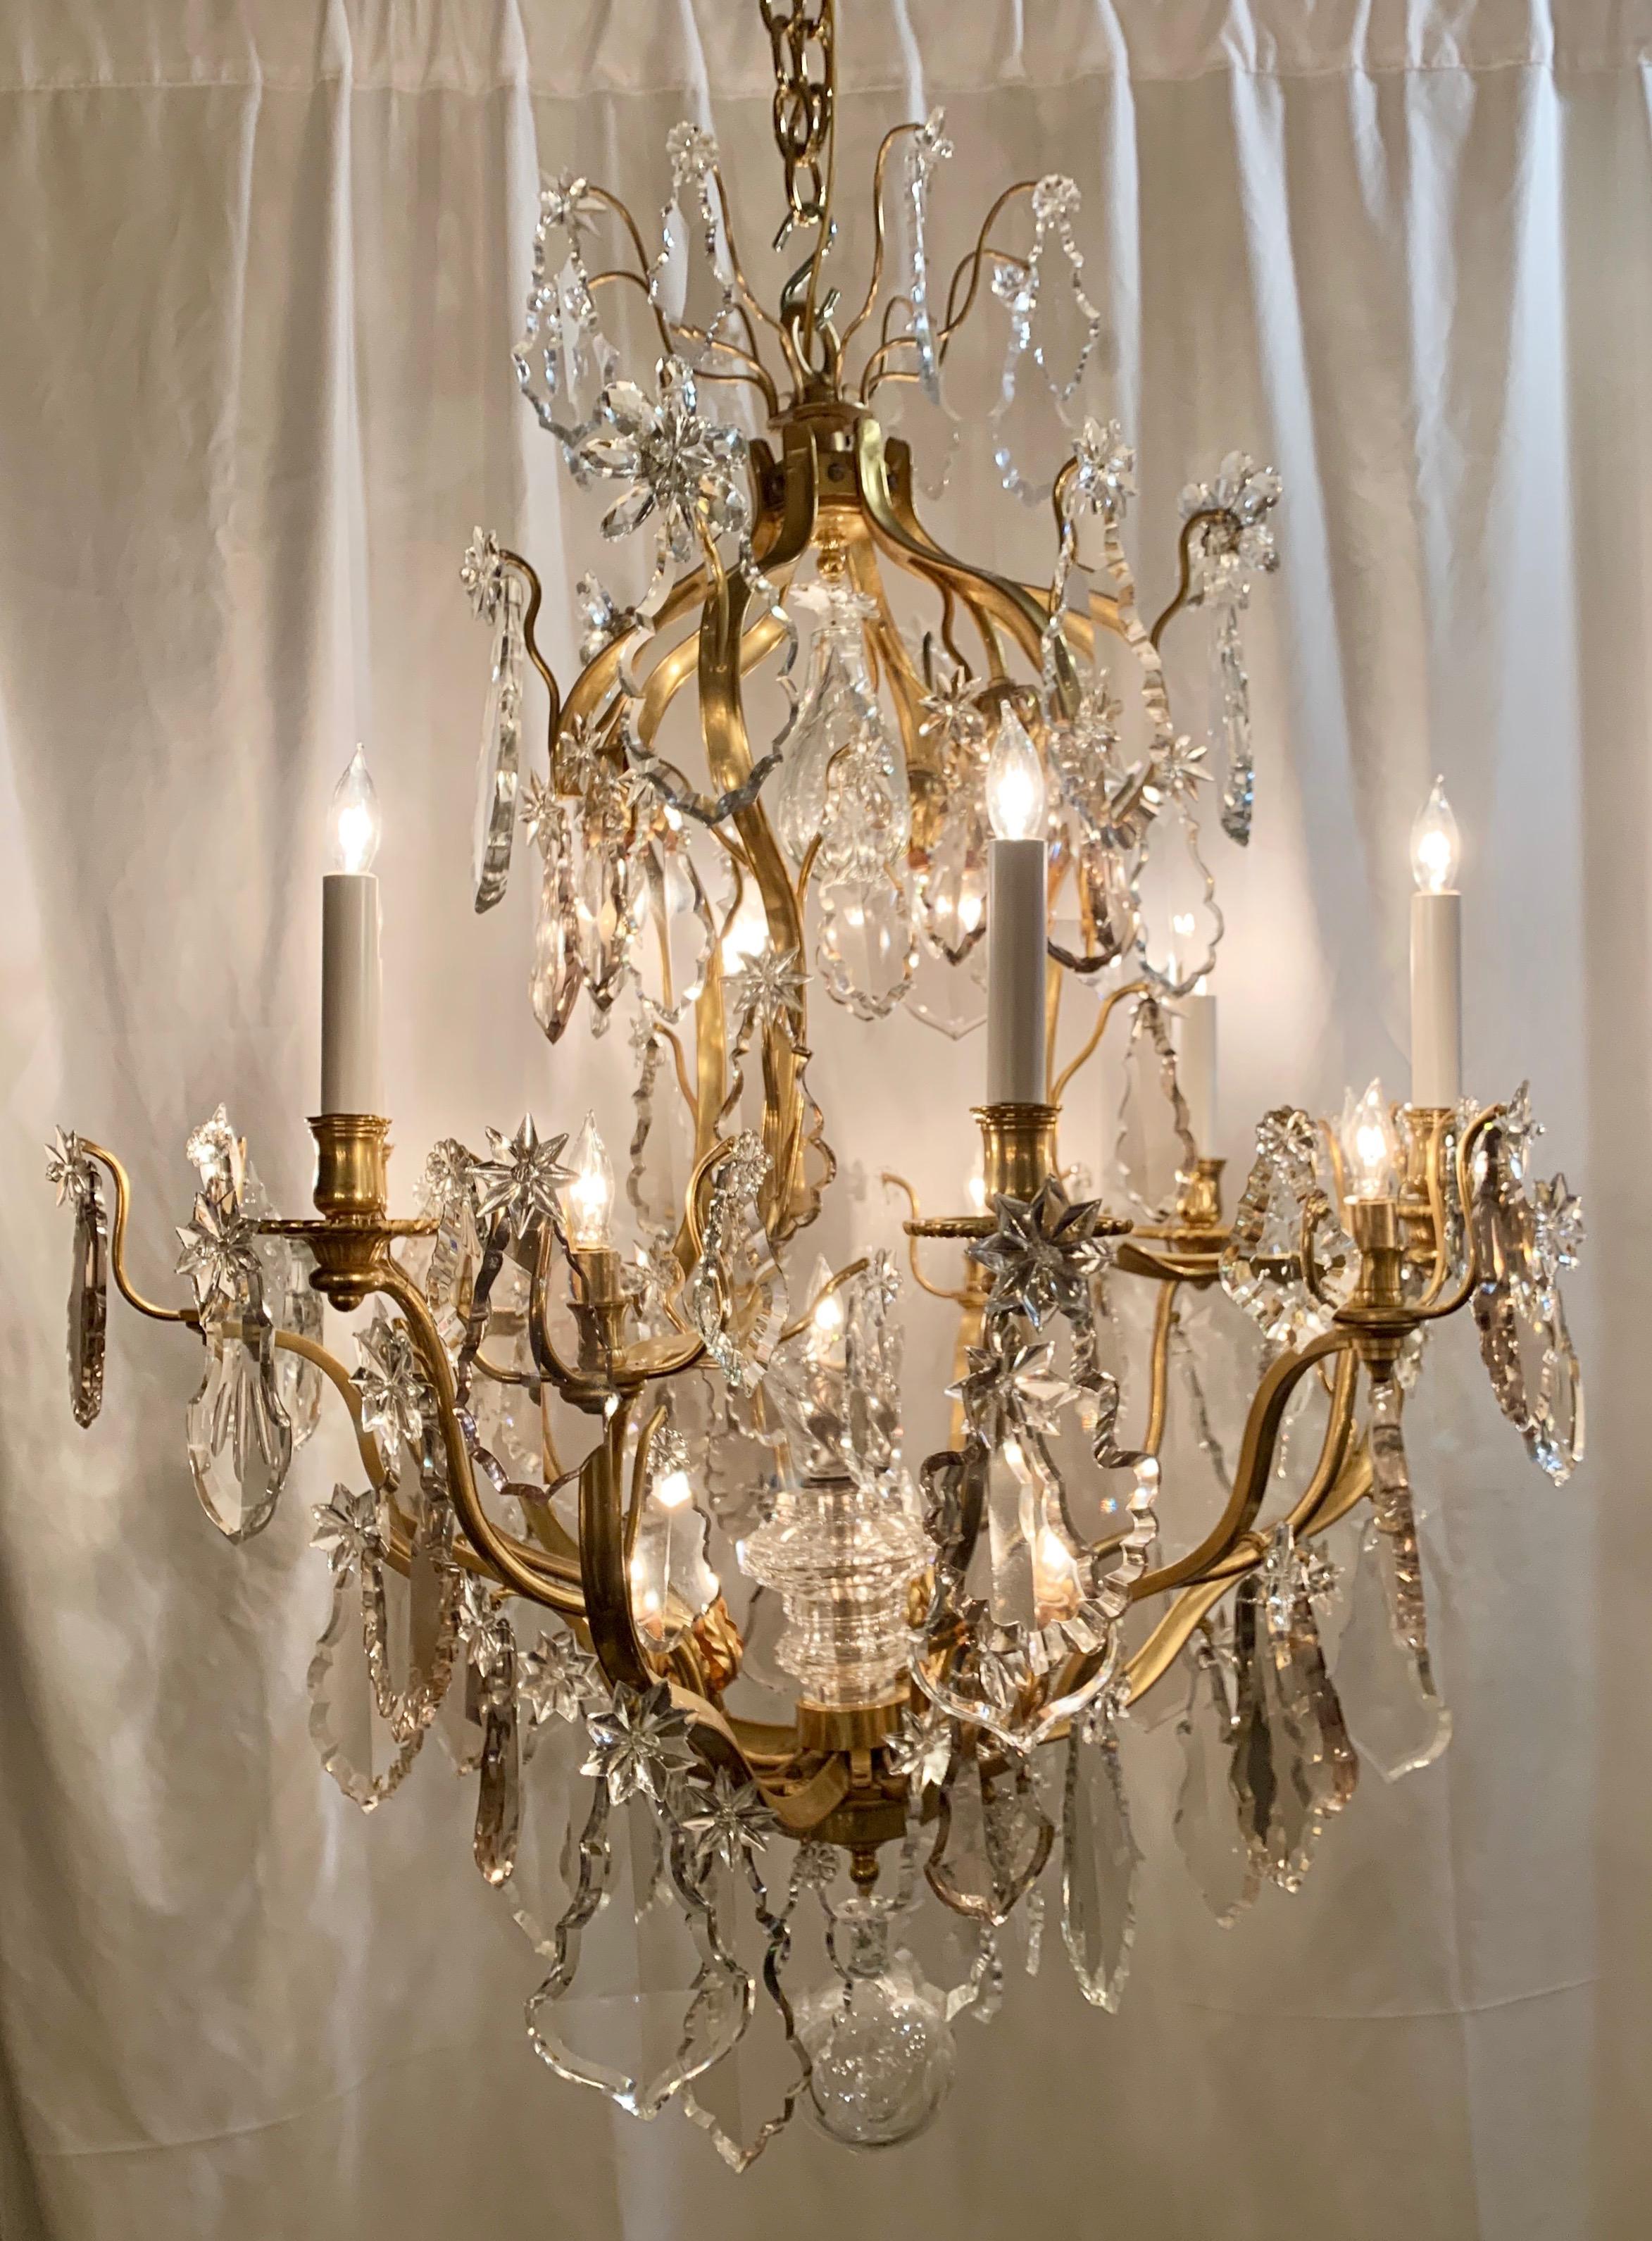 Antique French Baccarat crystal chandelier.
    